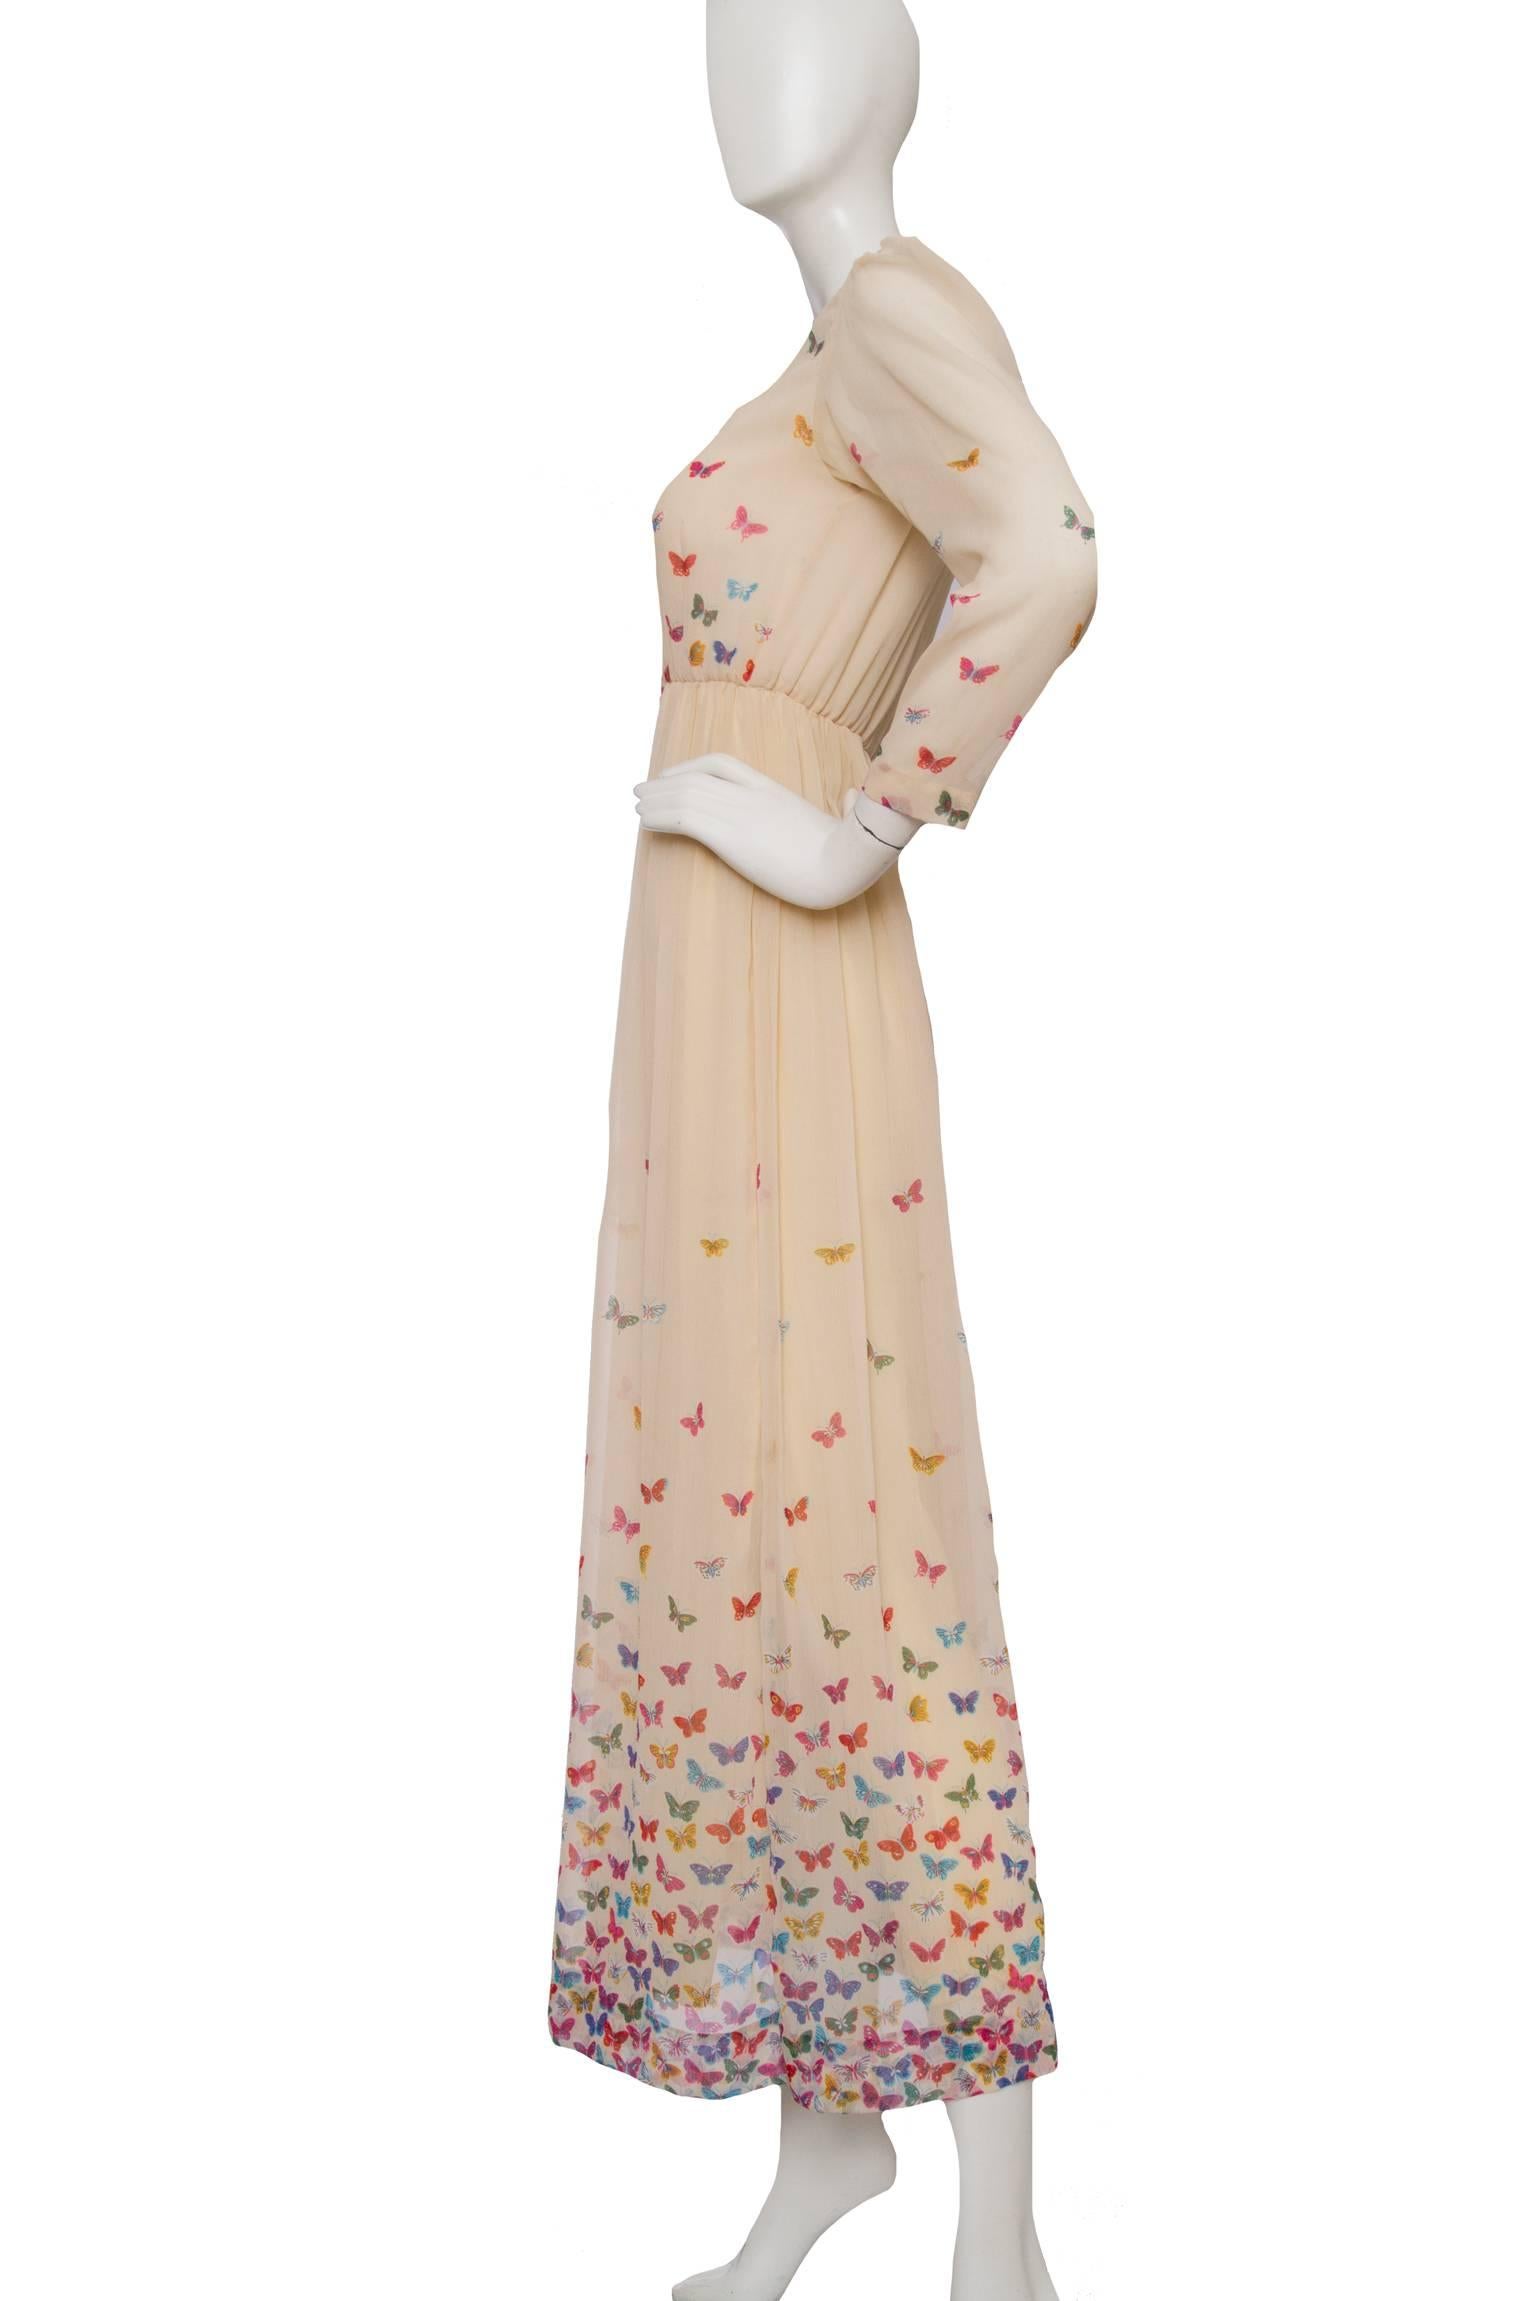 A delicate 1970s Hanae Mori beige silk dress with a nipped in elasticated waist, a sheer blouse and a multi-layered & pleated floor-length skirt. The dress has long tapered sleeves, a silk satin trim along a scoop neckline and a buttoned down